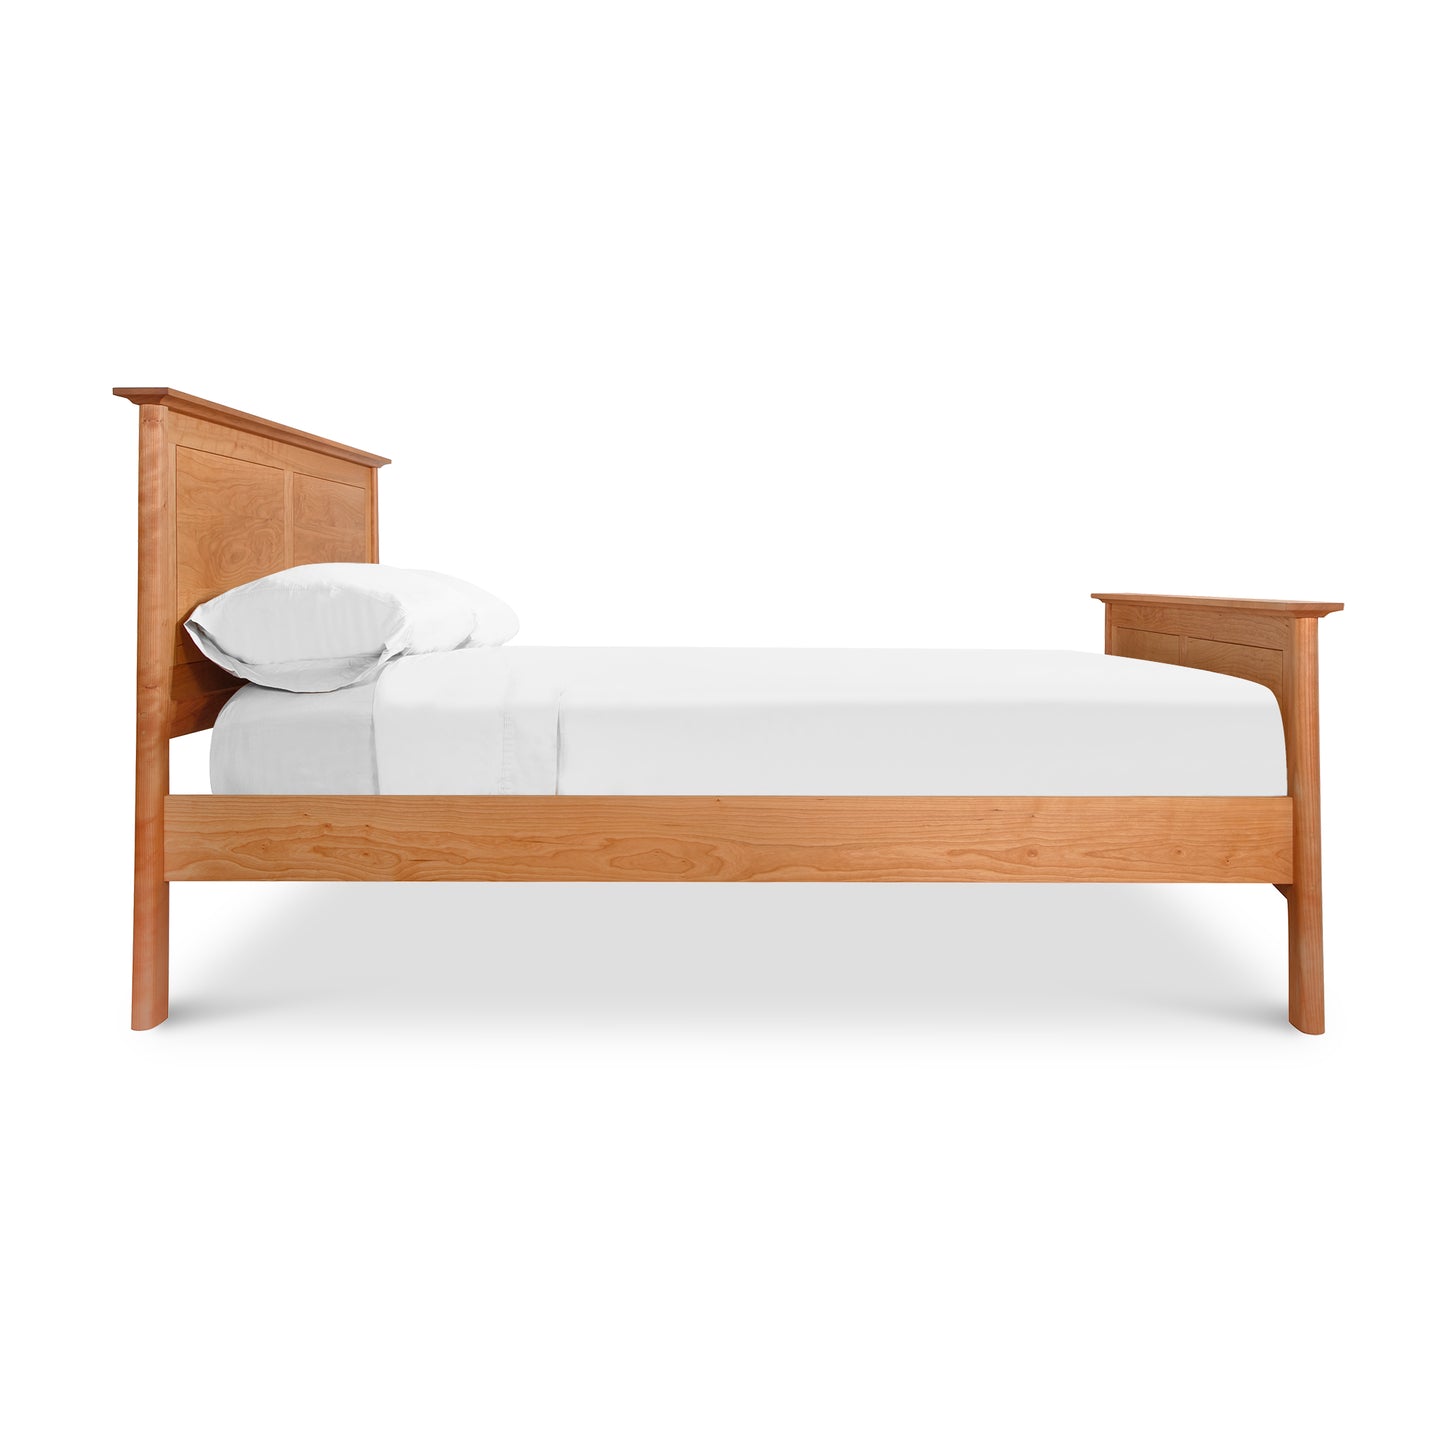 A single Cherry Moon Panel Bed from Maple Corner Woodworks with a curved headboard and footboard, featuring crisp white bedding and one white pillow, isolated on a white background.